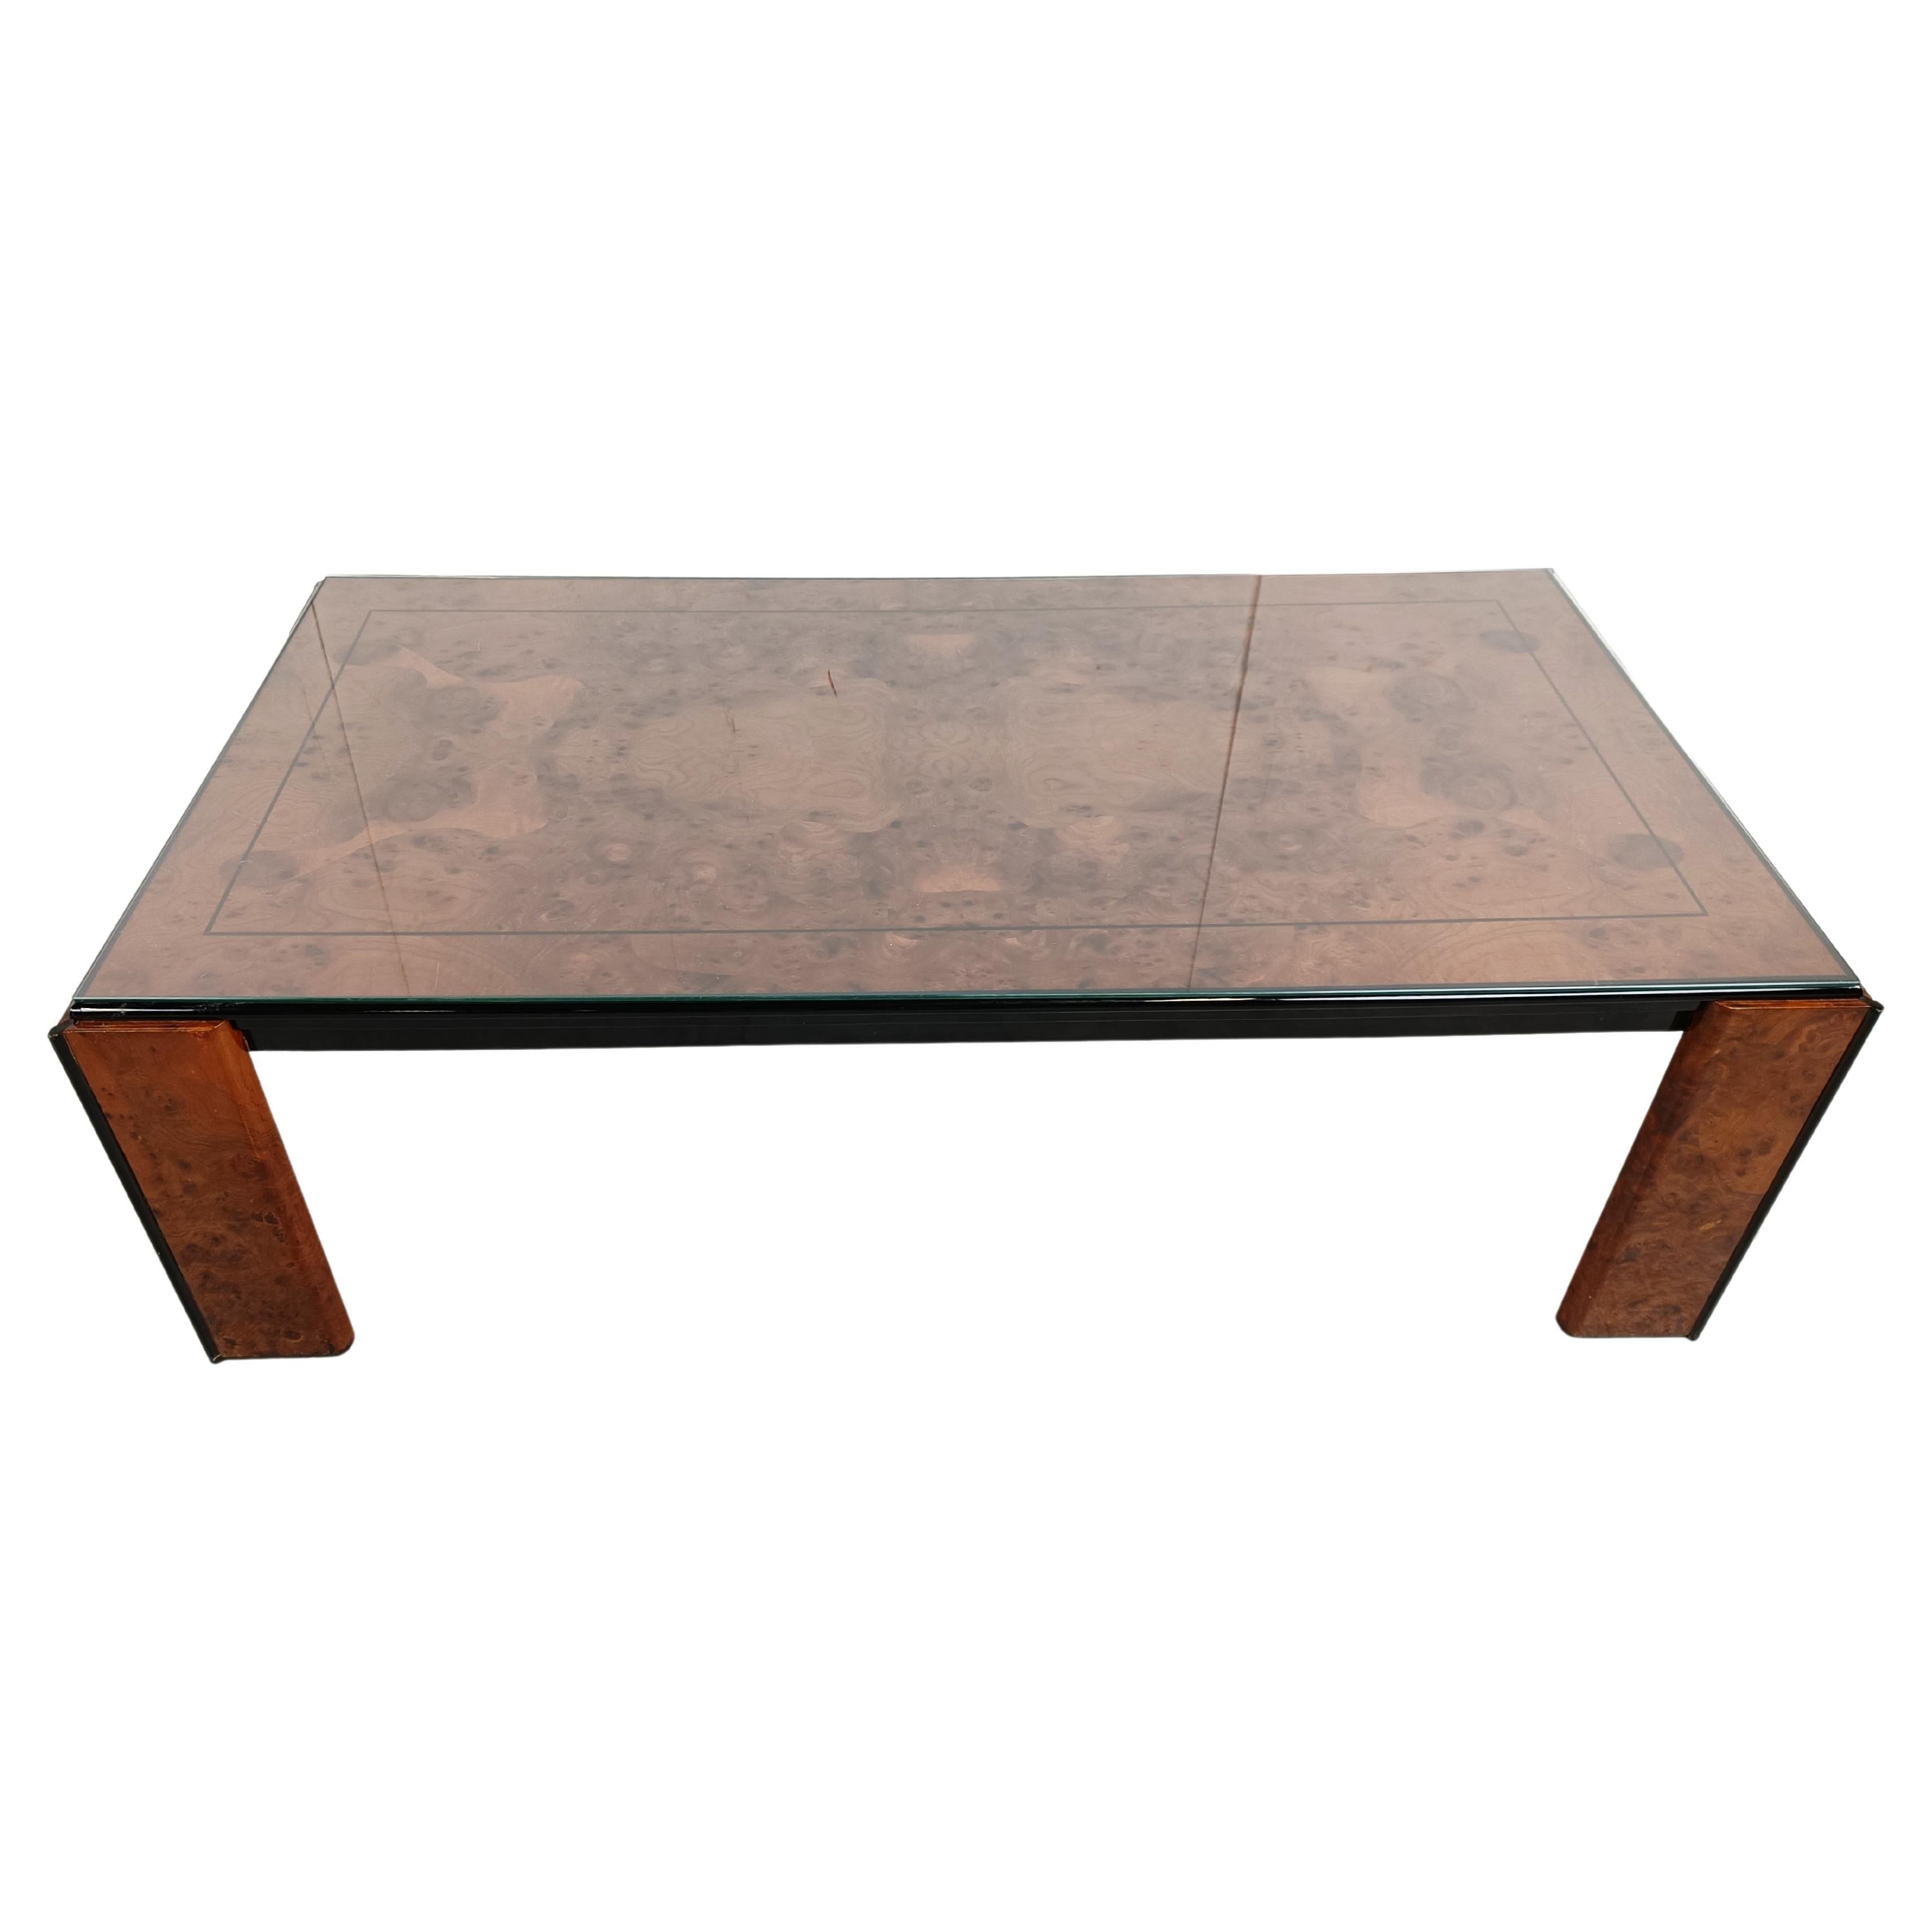 Vintage Burl Wood and Lacquer Coffee Table, 1970s For Sale